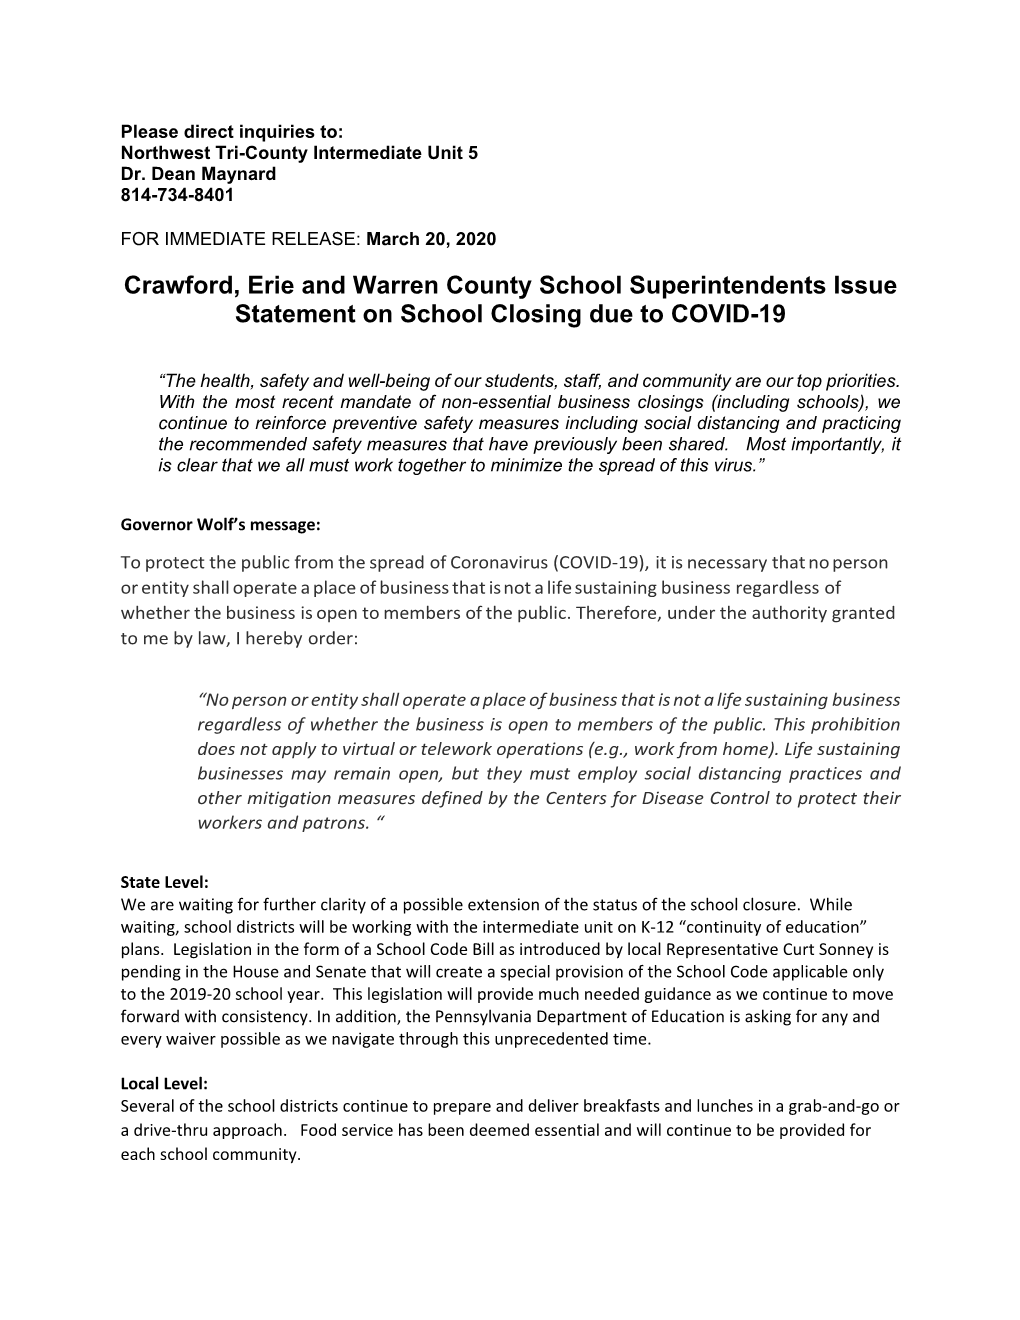 Crawford, Erie and Warren County School Superintendents Issue Statement on School Closing Due to COVID-19